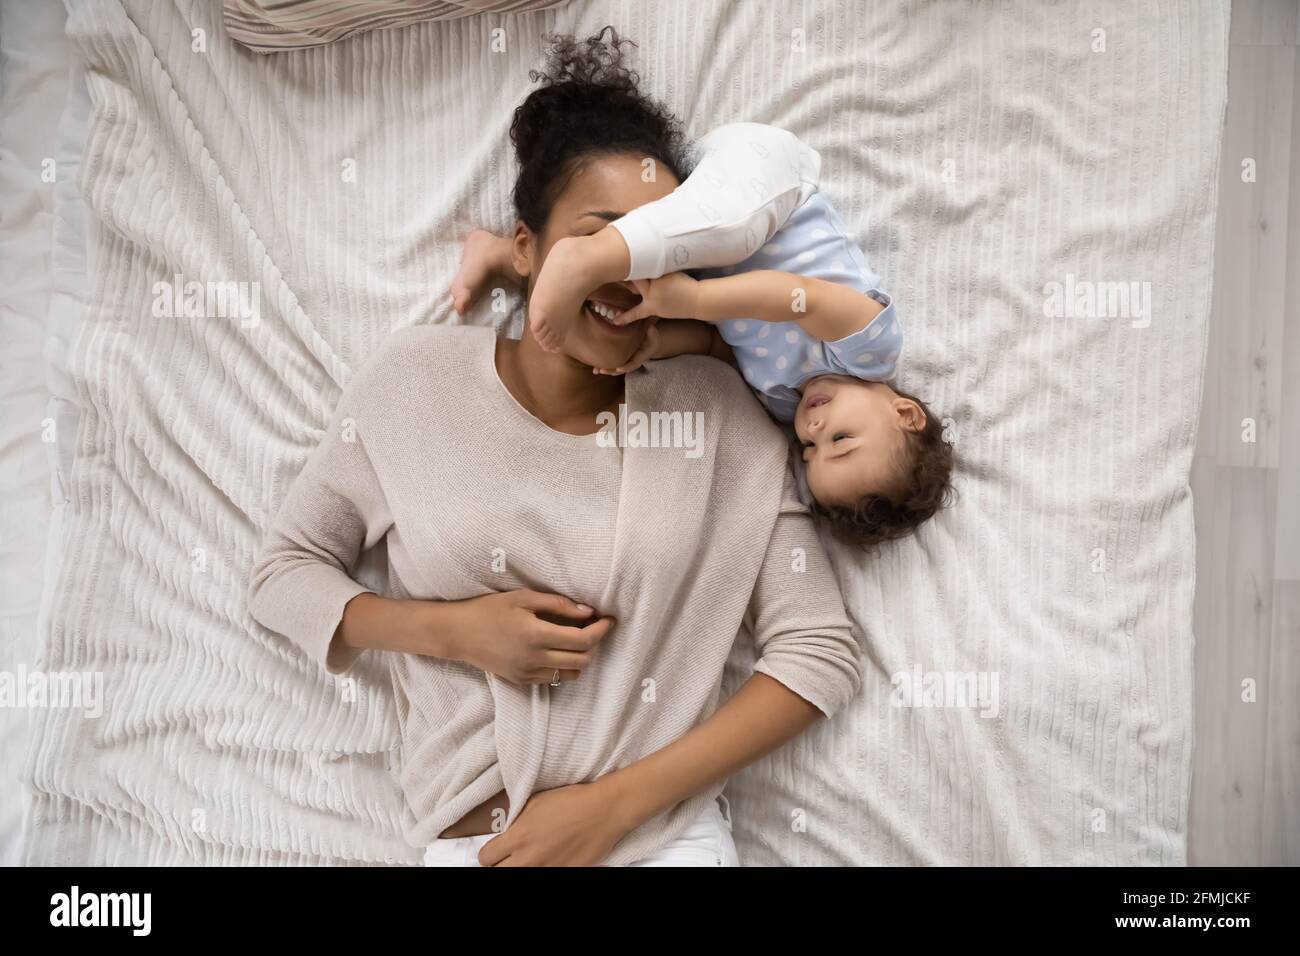 Smiling African American mom relax with little baby daughter Stock Photo